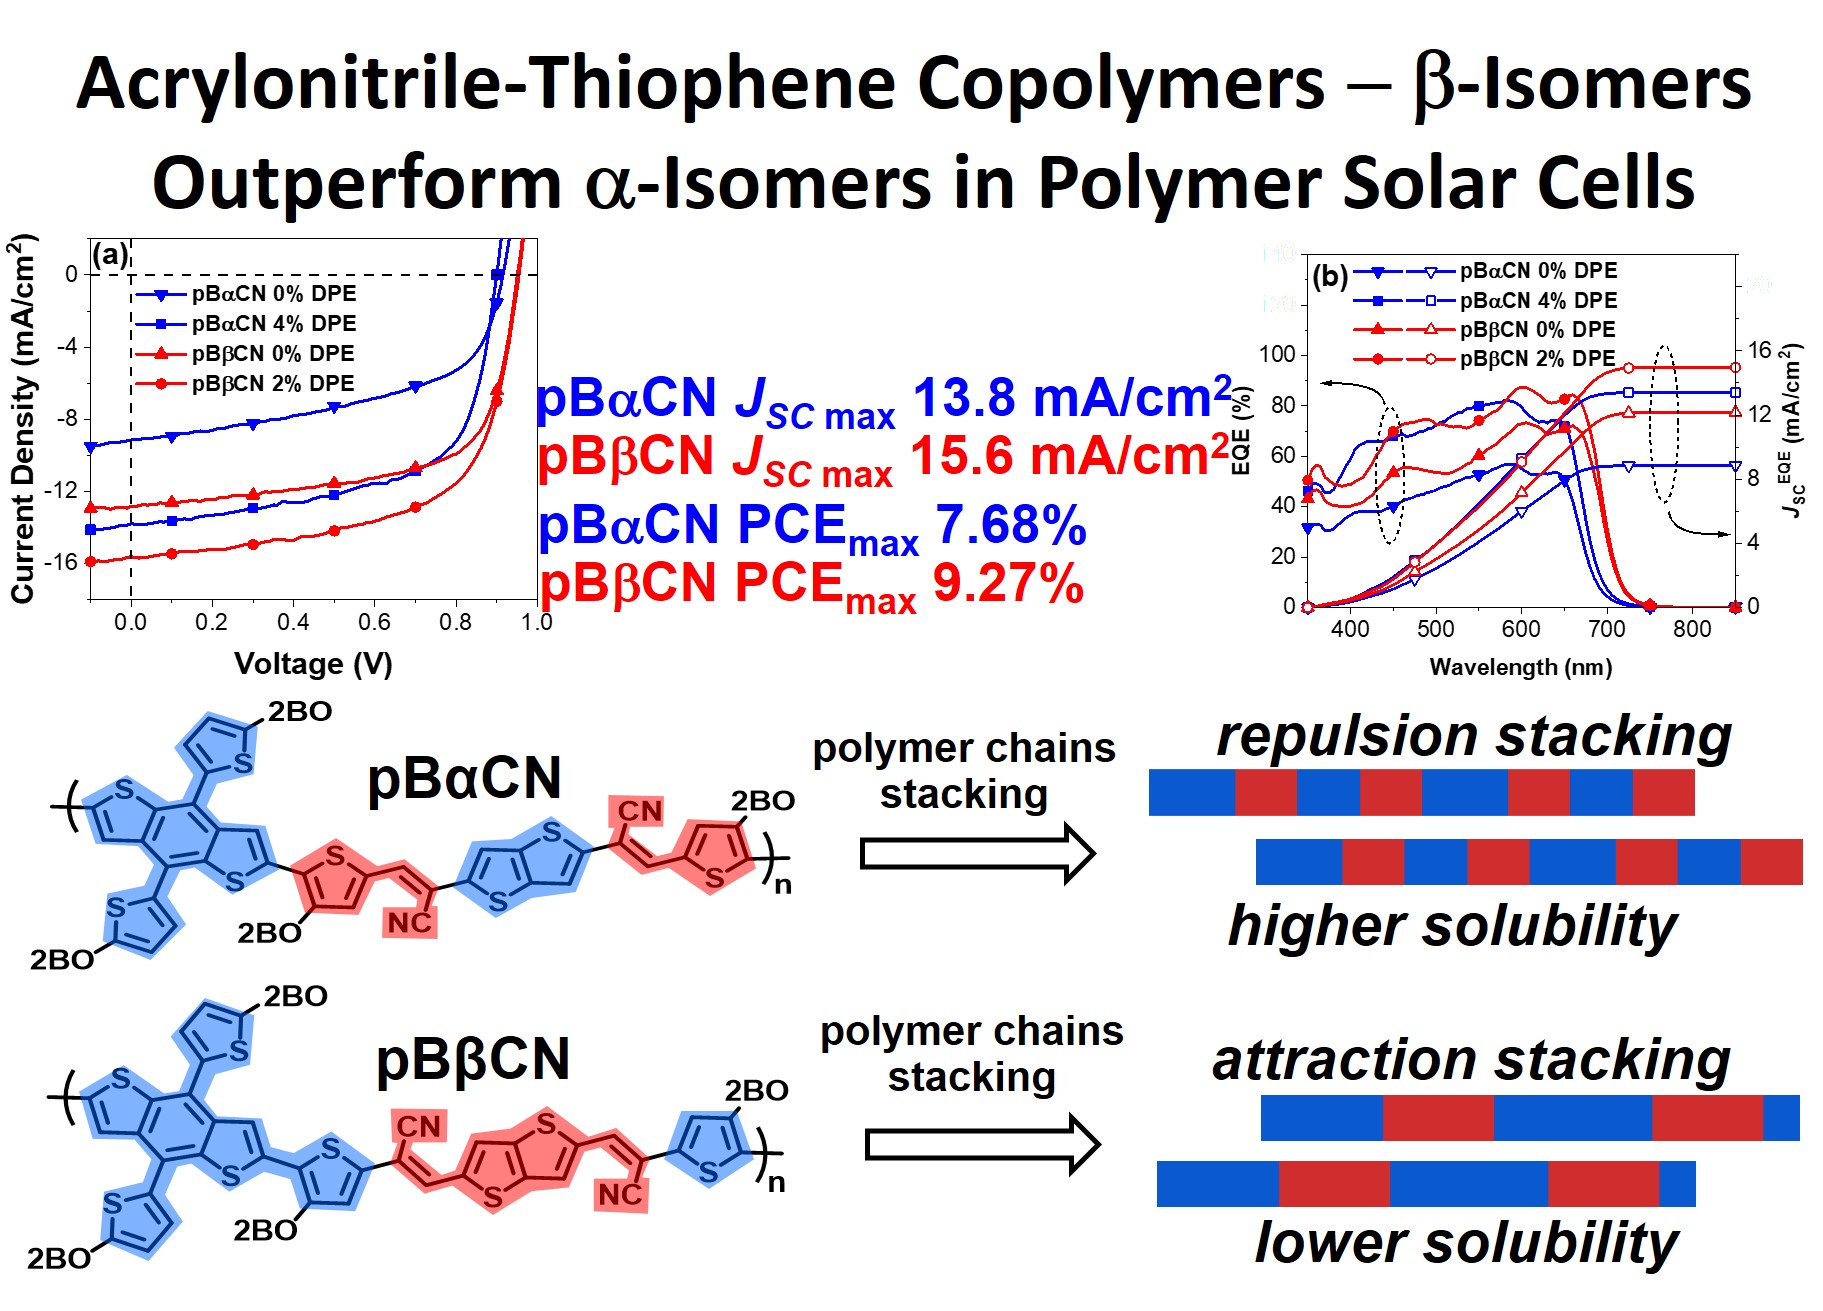 Acrylonitrile-Thiophene Copolymers - f3-lsomers  Outperform a-Isomers in Polymer Solar Cells 